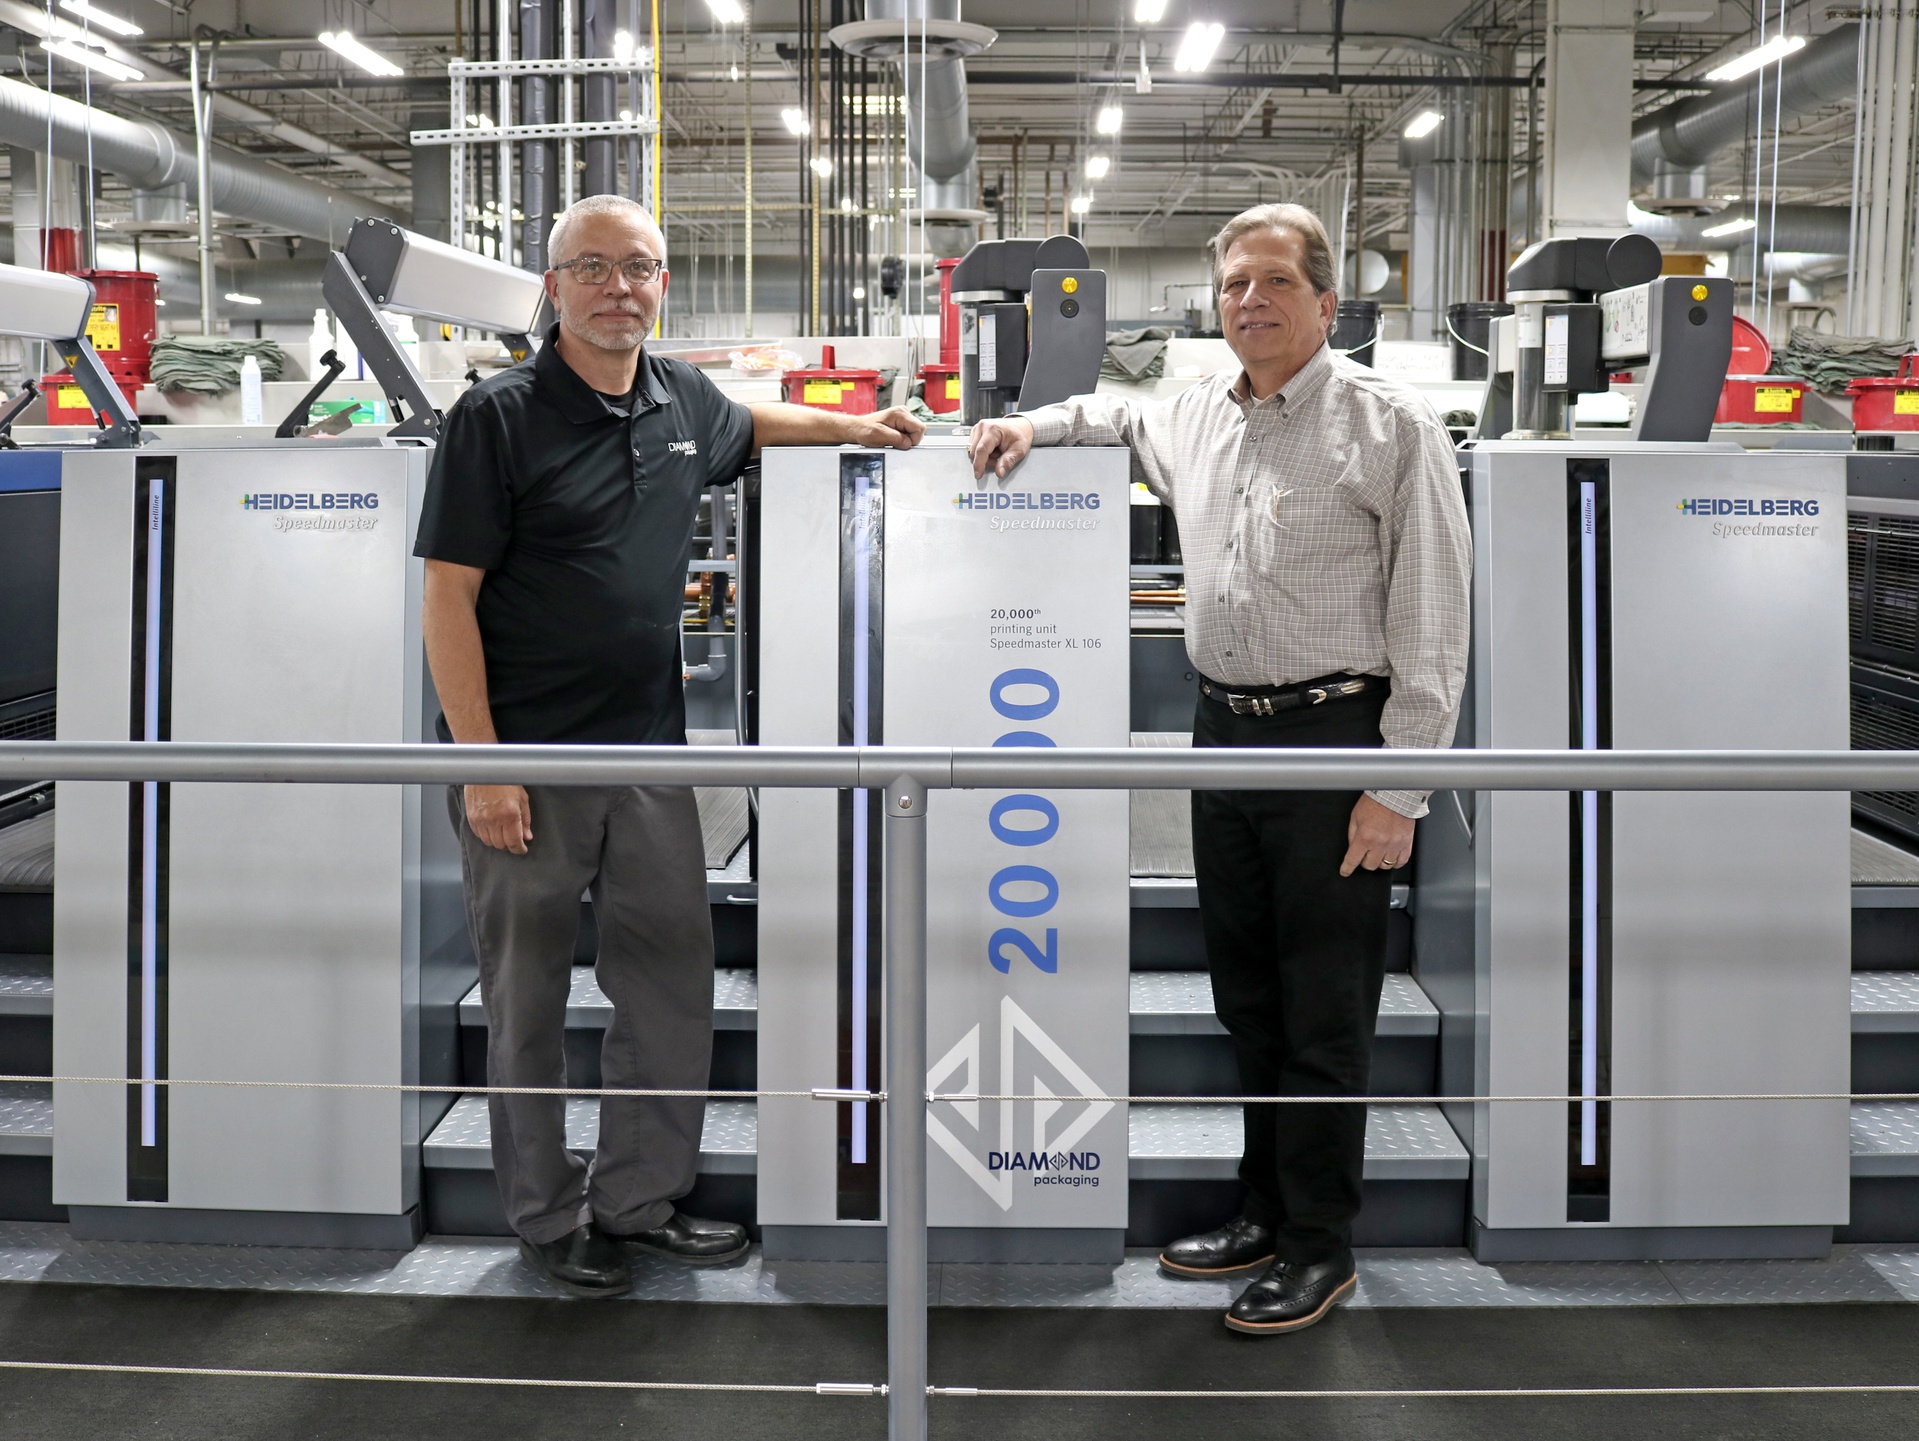 Diamond's new Heidelberg Speedmaster XL 106 offset press is equipped with UV, Prinect Inpress Control 3, and FoilStar cold foiling unit.